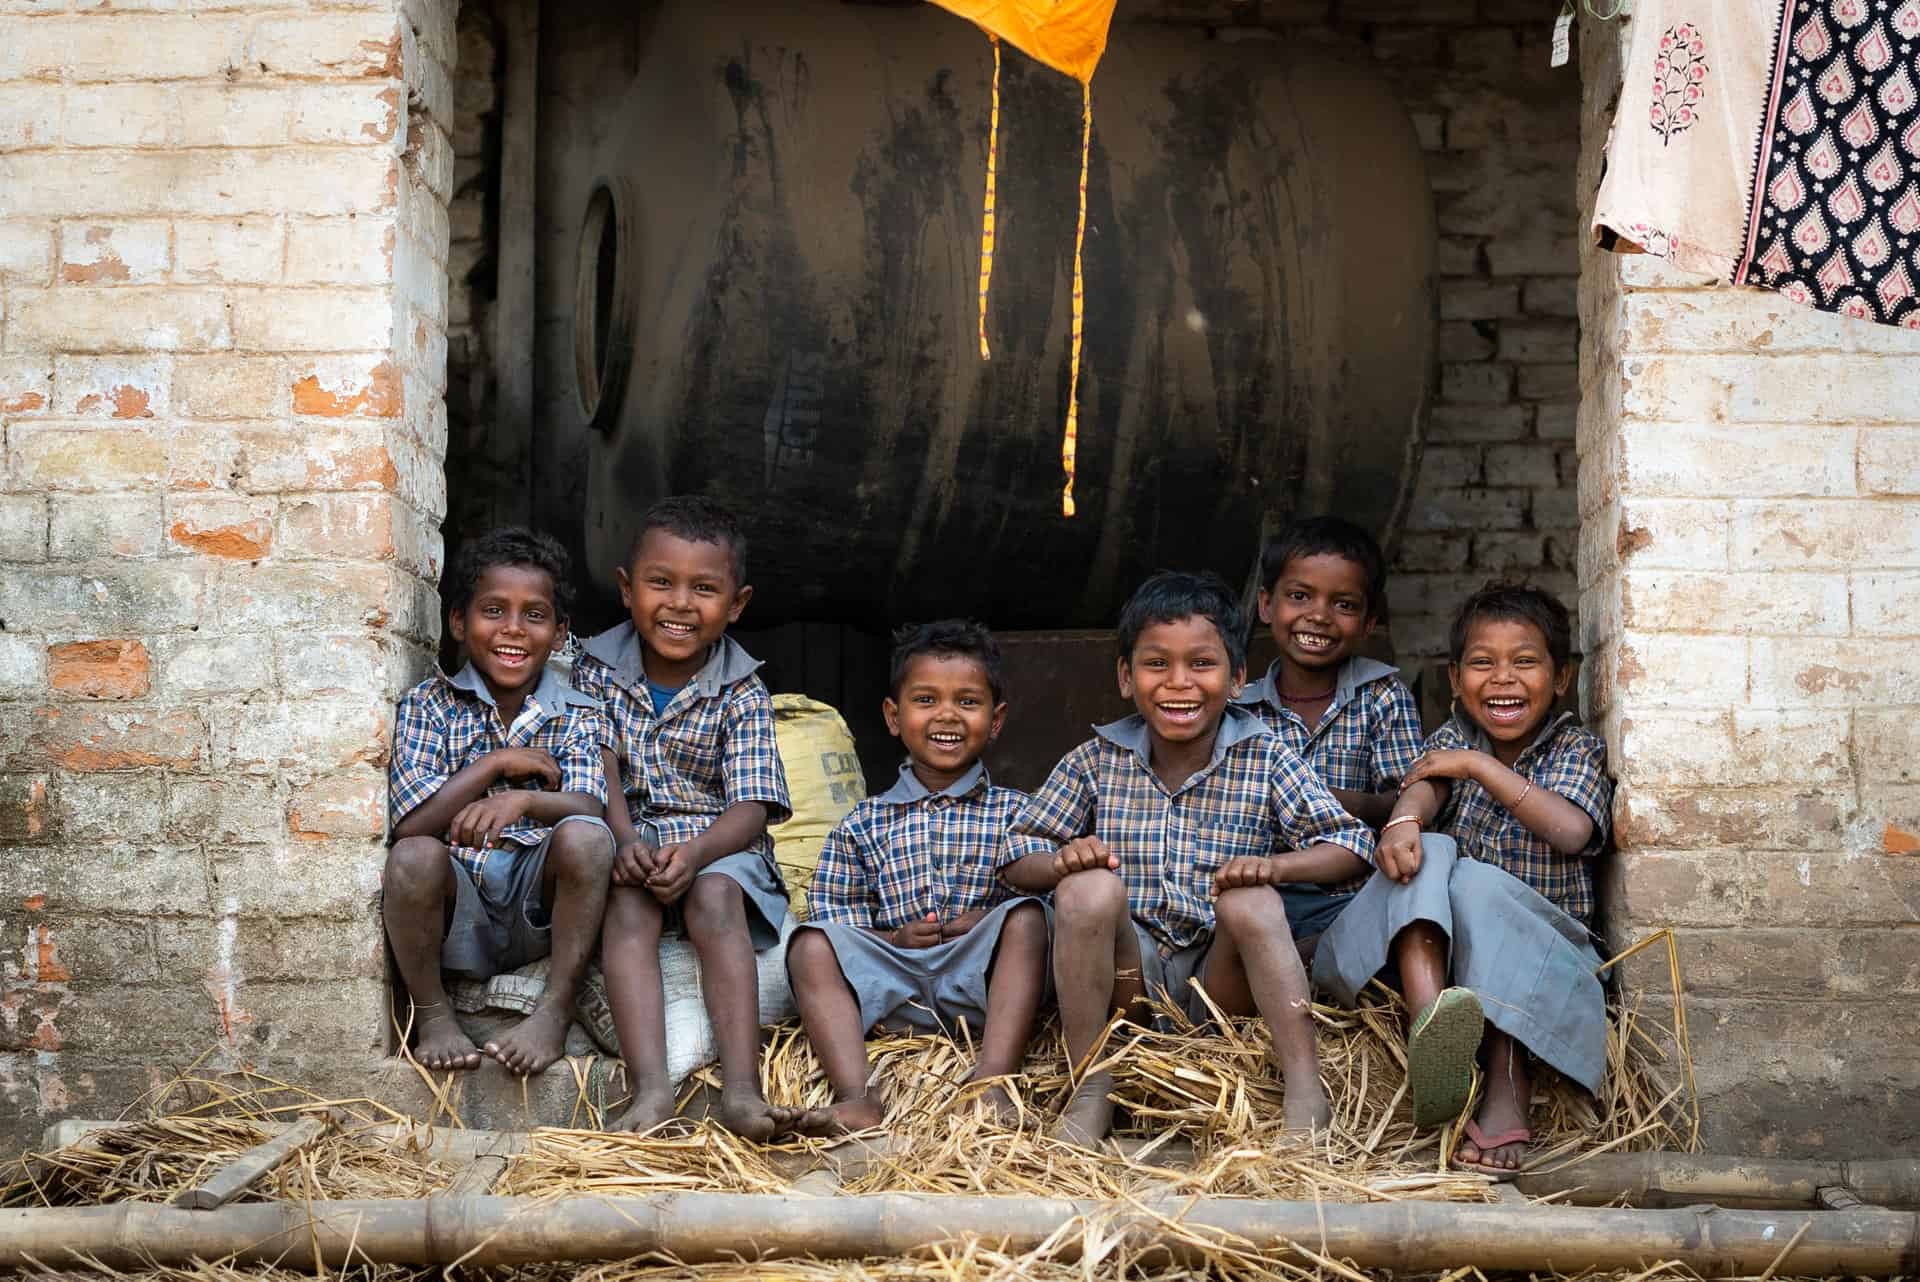 Children of migrant parents working in the brick factories of Bihar, India, who are receiving an education through Action Education initiatives. India, March 2022. Chandra Kiran